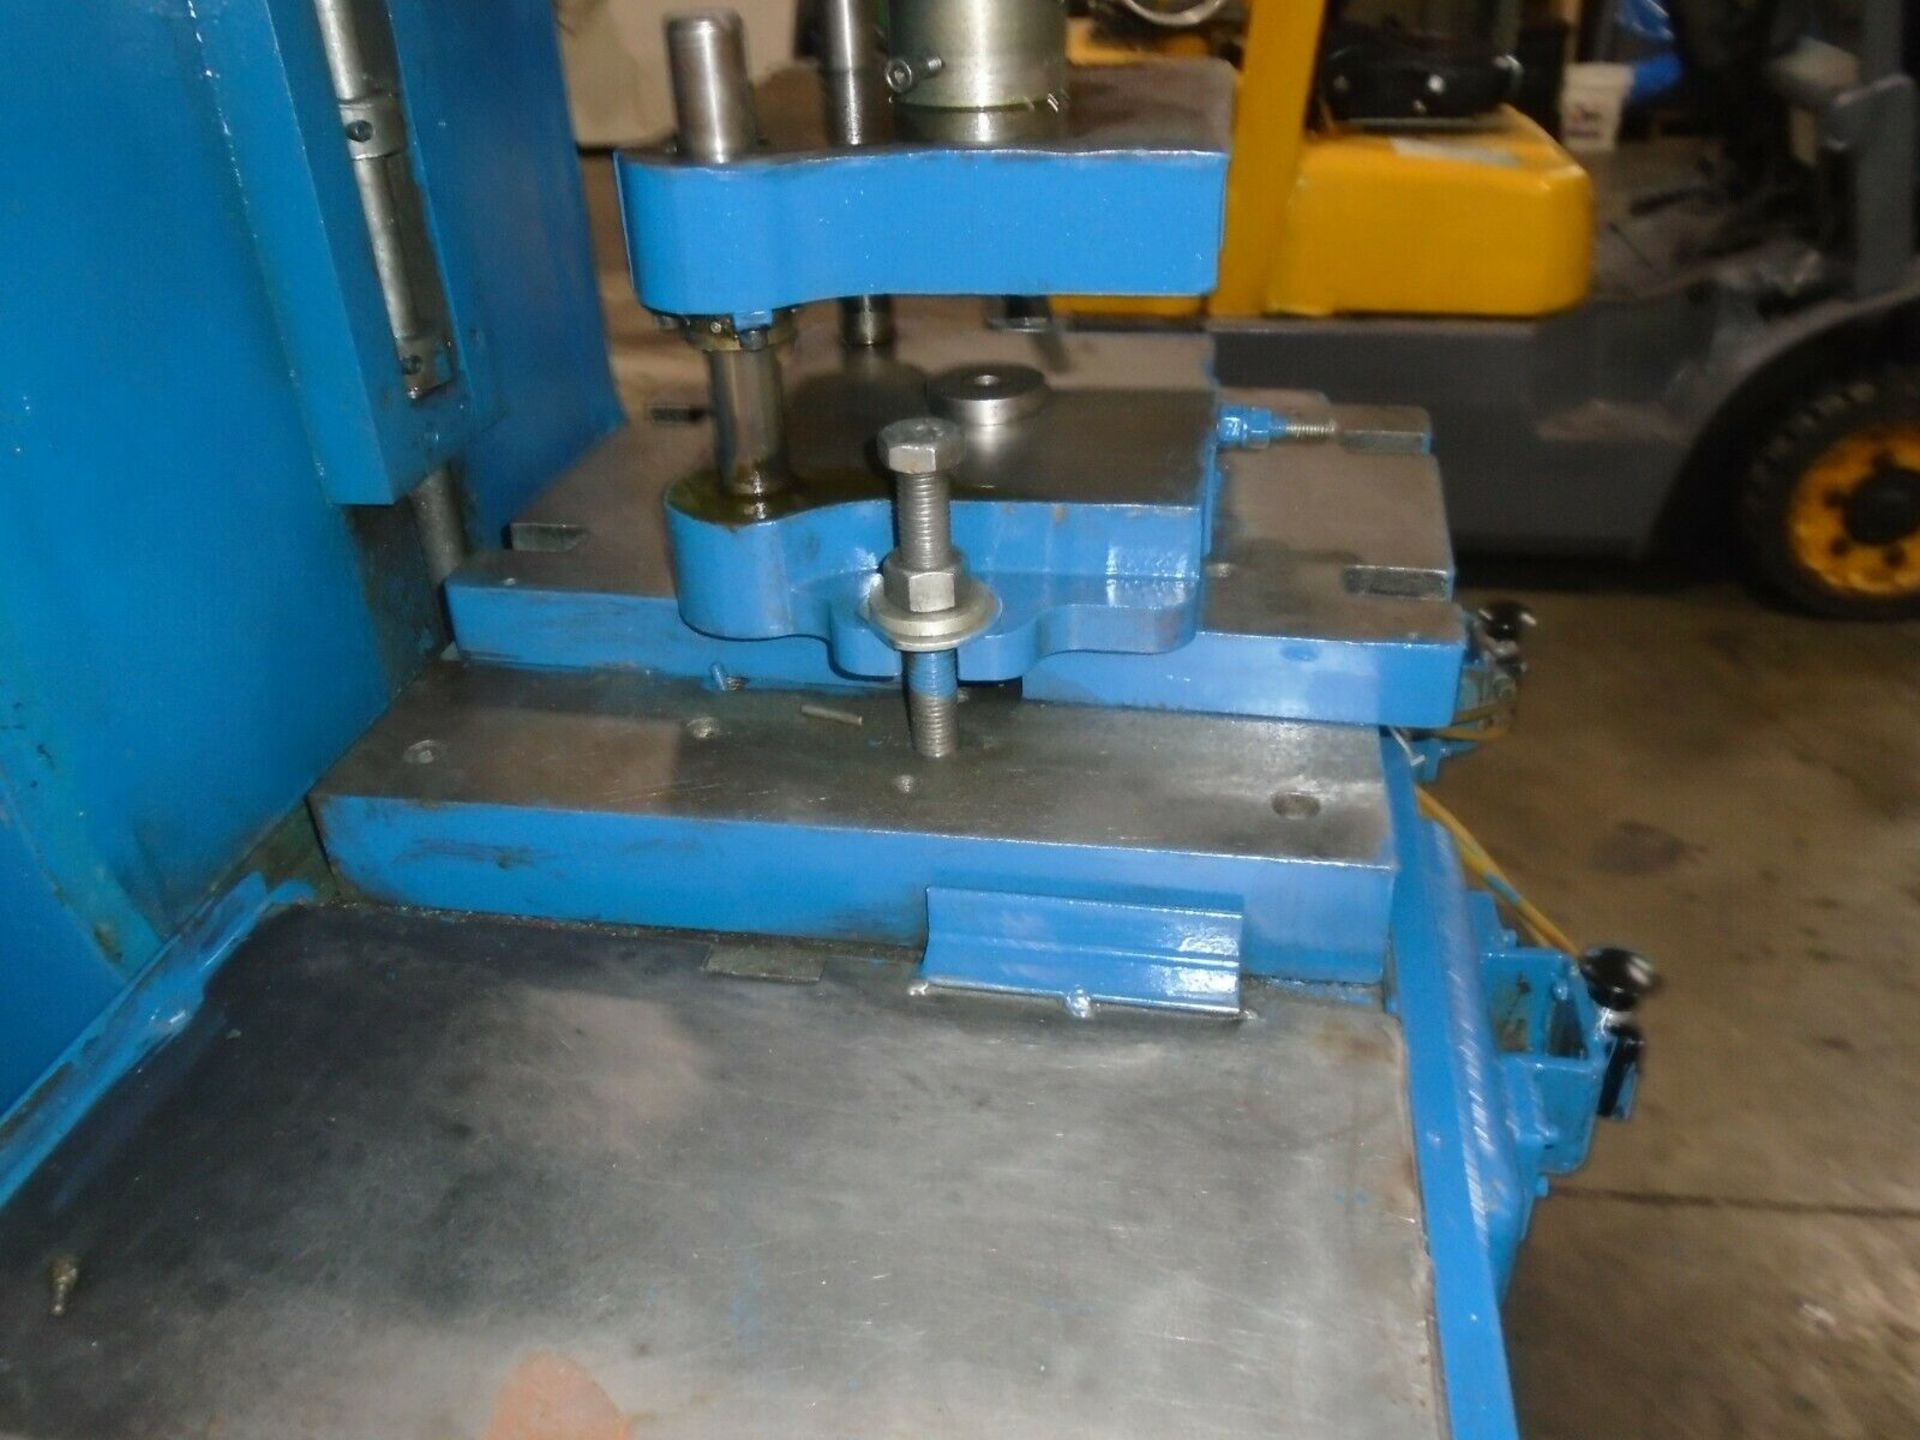 Denison 50 Ton Hydraulic Press With 18 Die Sets - Image 7 of 10